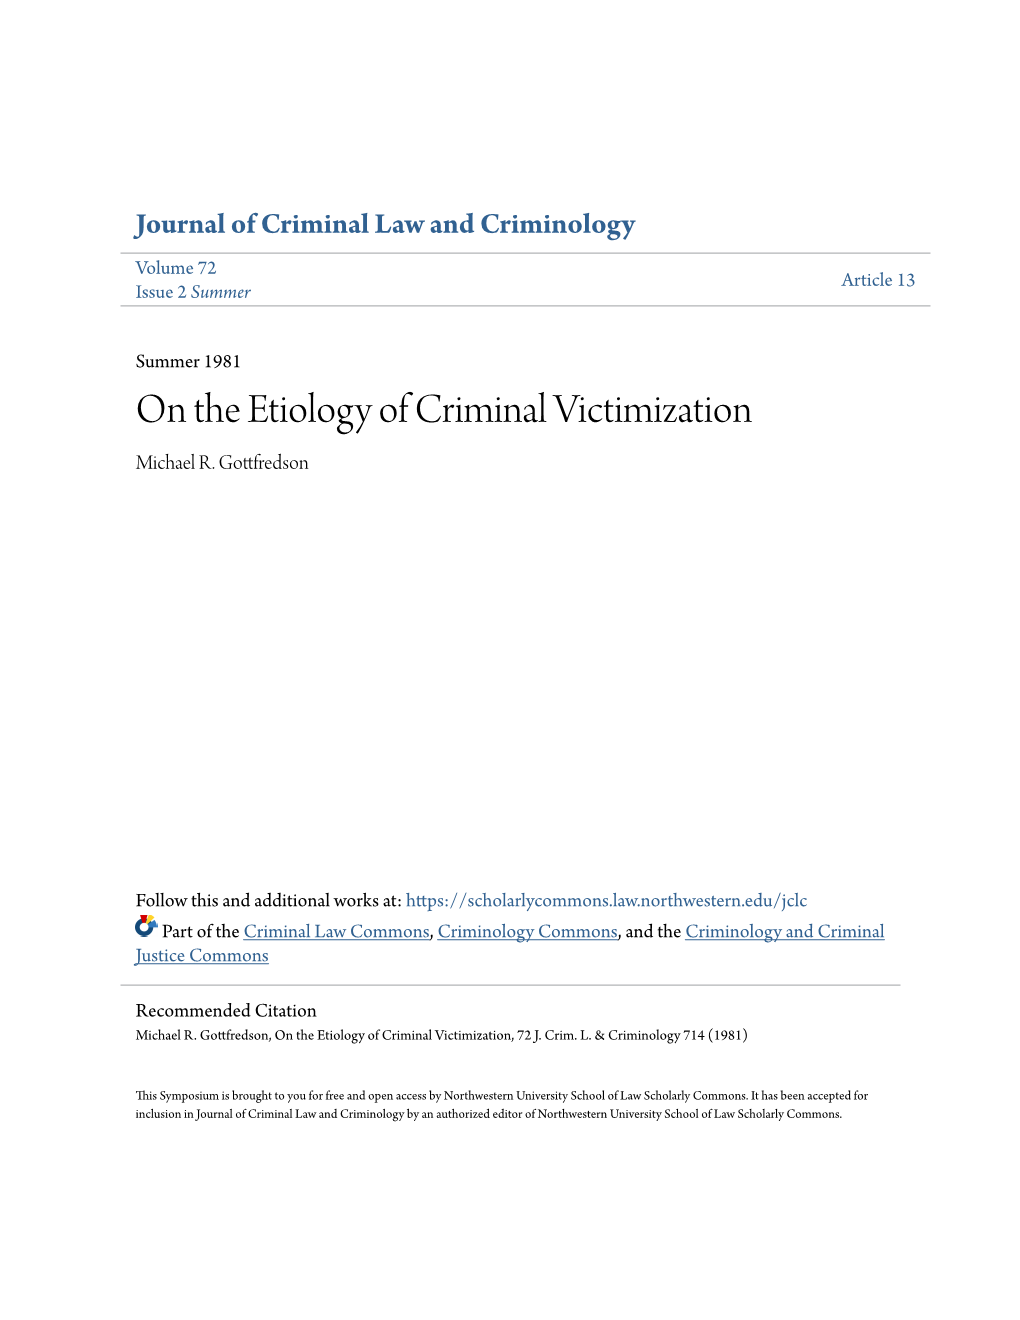 On the Etiology of Criminal Victimization Michael R